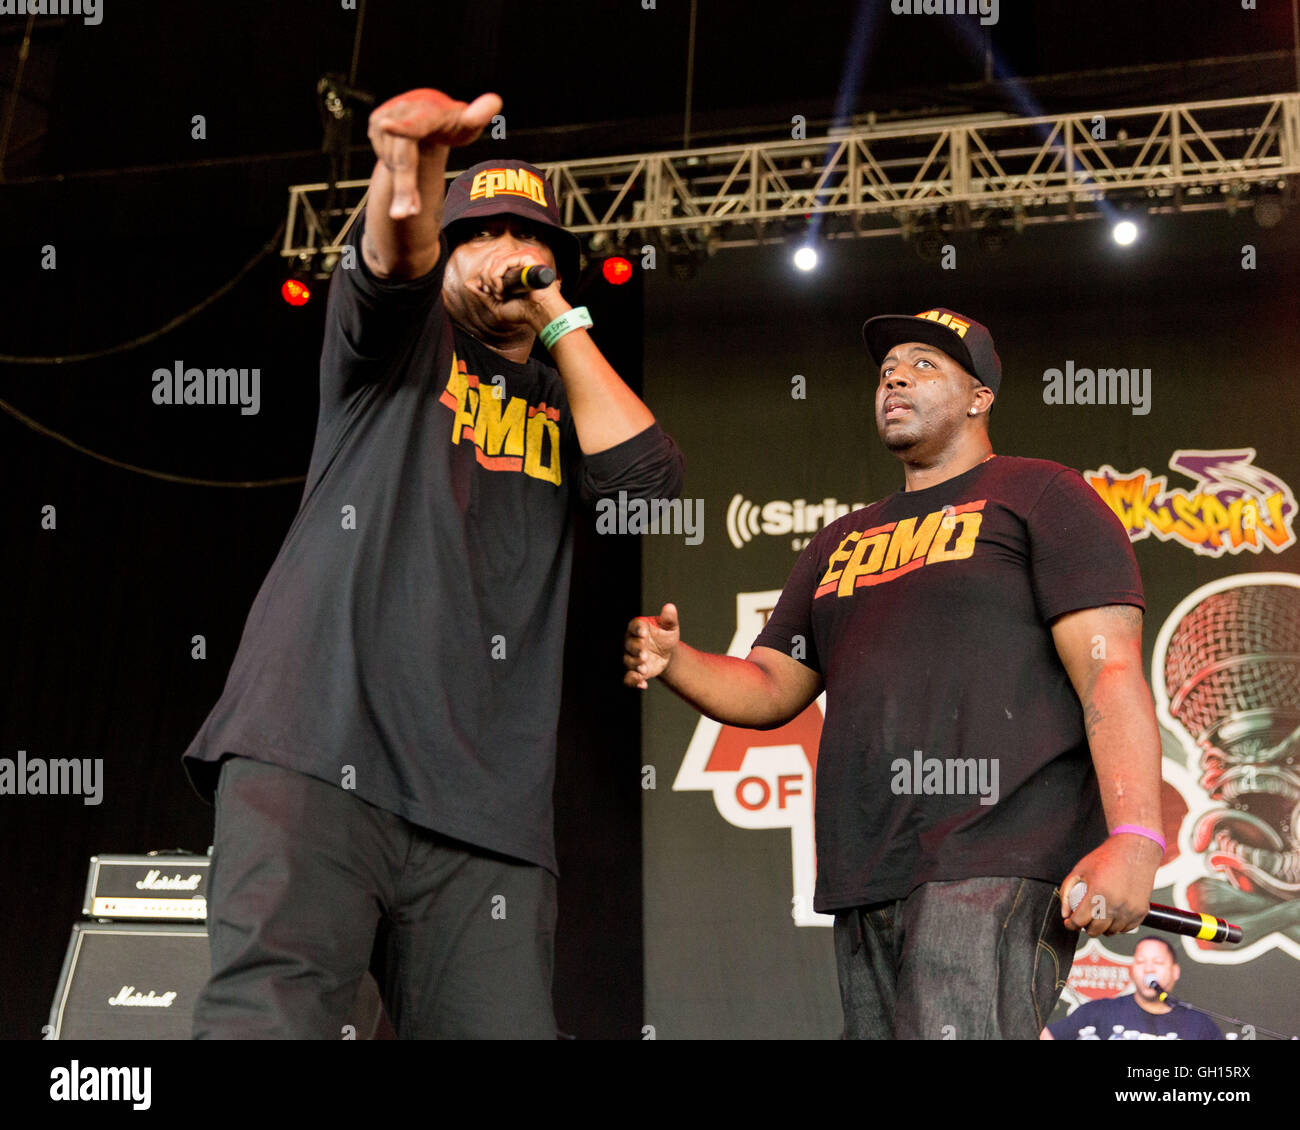 Tinley Park, Illinois, USA. 5th Aug, 2016. PARRISH SMITH and ERICK SERMON of EPMD perform live at Hollywood Casino Amphitheater during the Art of Rap Festival in Tinley Park, Illinois © Daniel DeSlover/ZUMA Wire/Alamy Live News Stock Photo